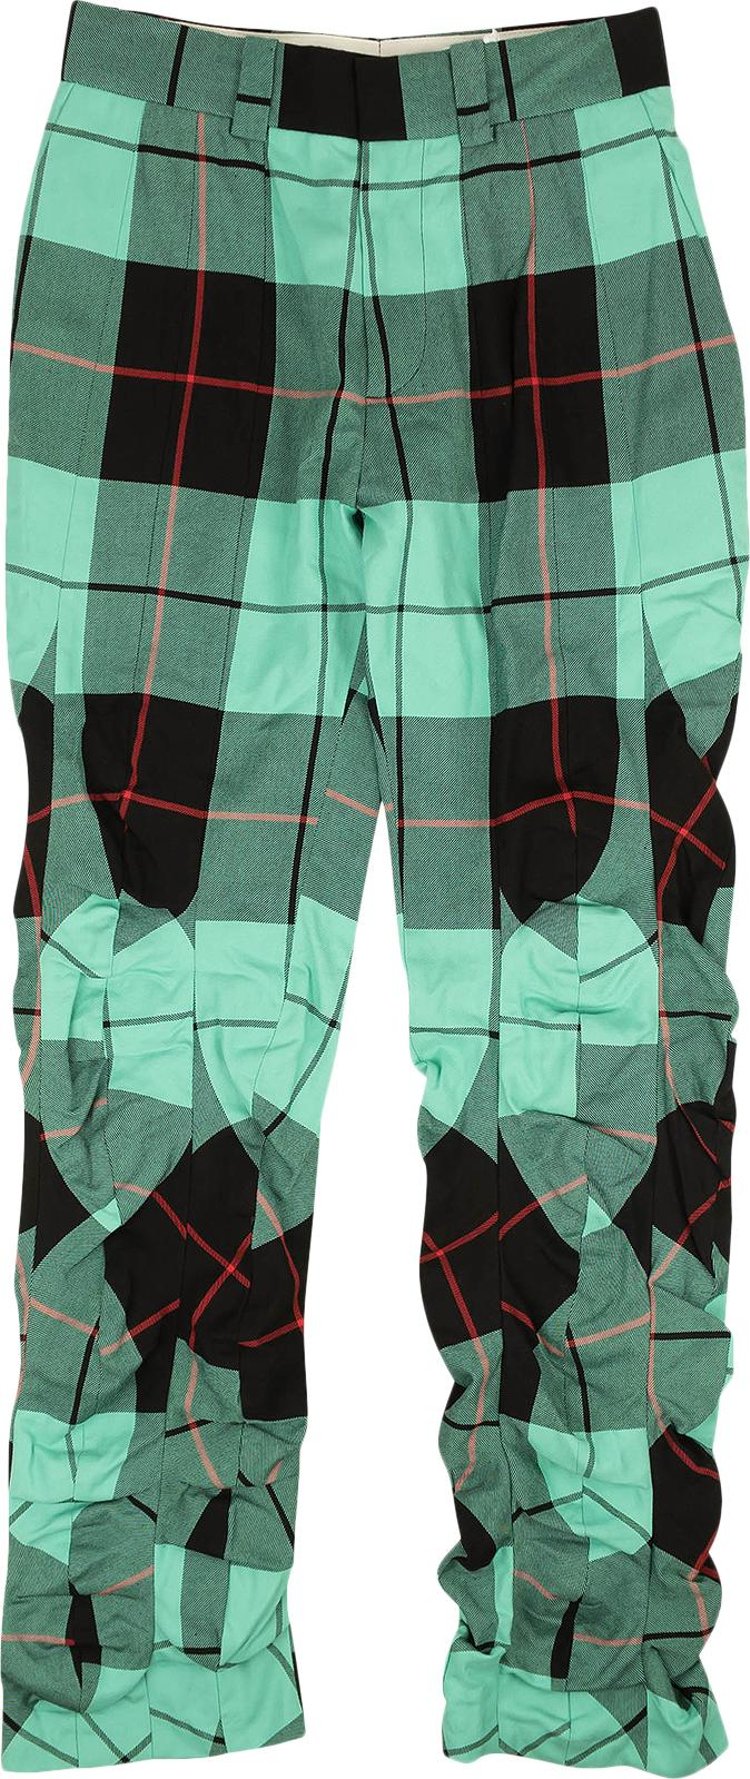 Charles Jeffrey Loverboy Wibble Suit Pants 'Green'